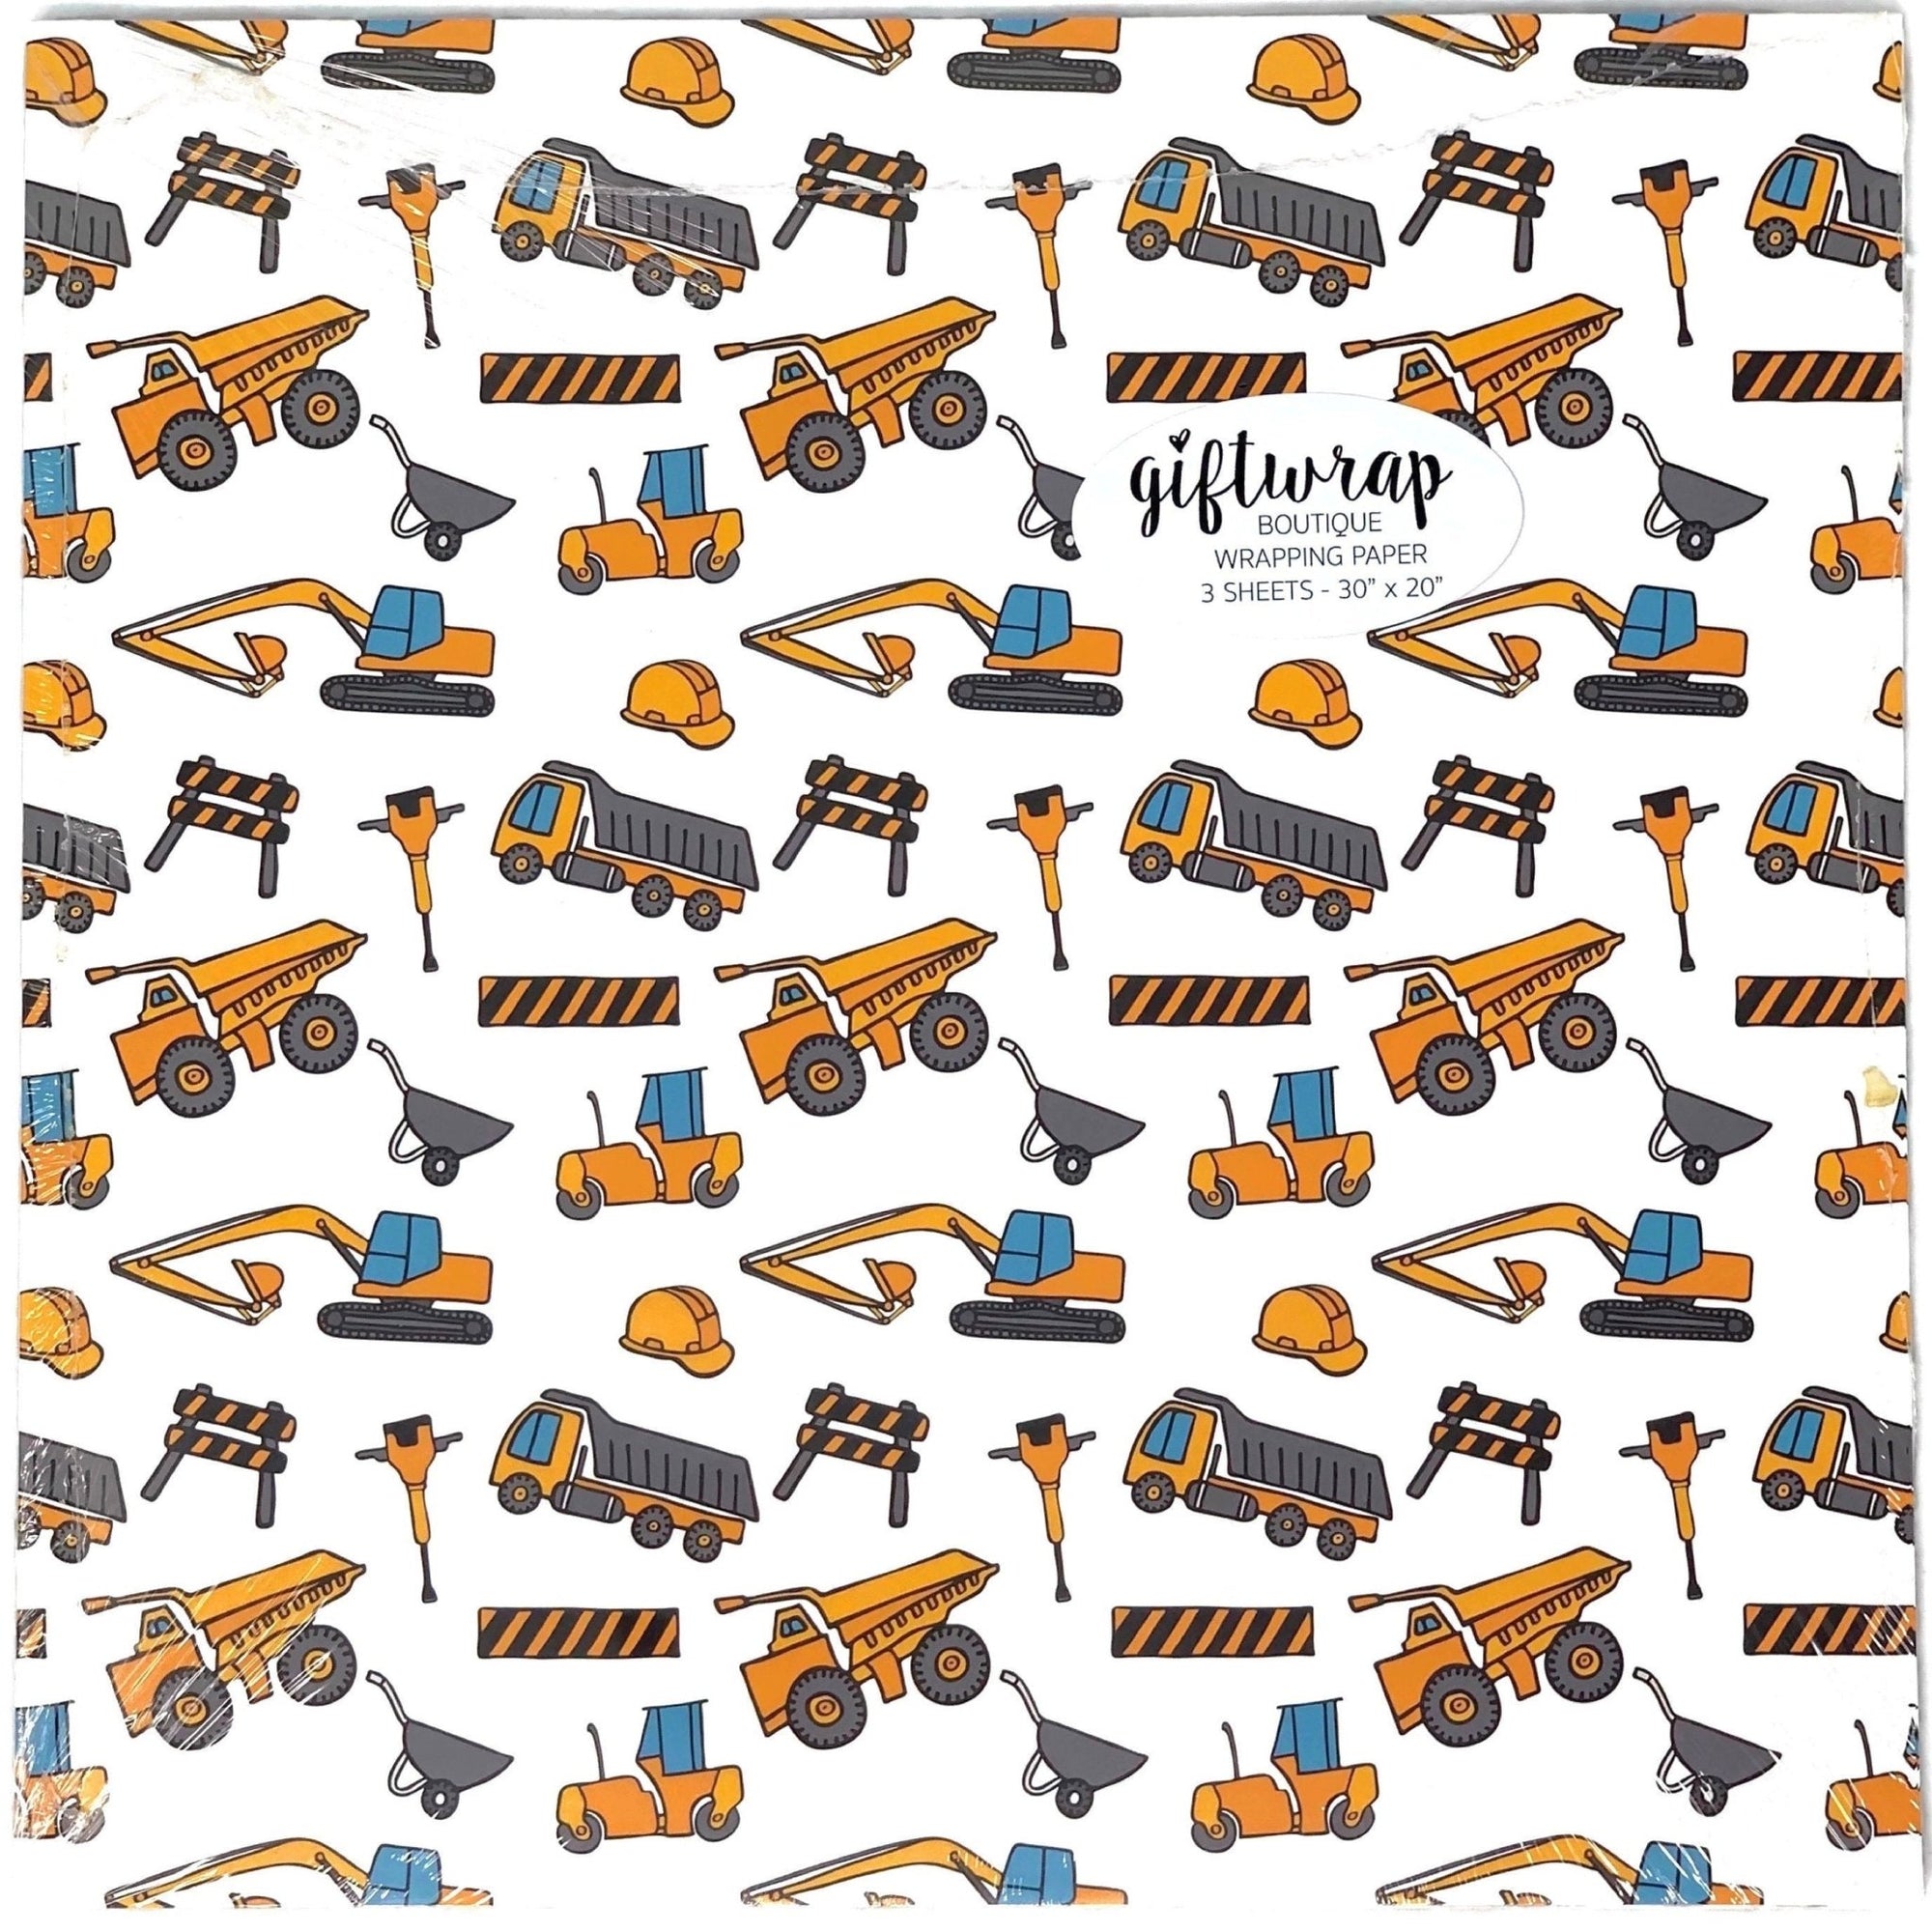 Construction Wrapping Paper - Stesha Party